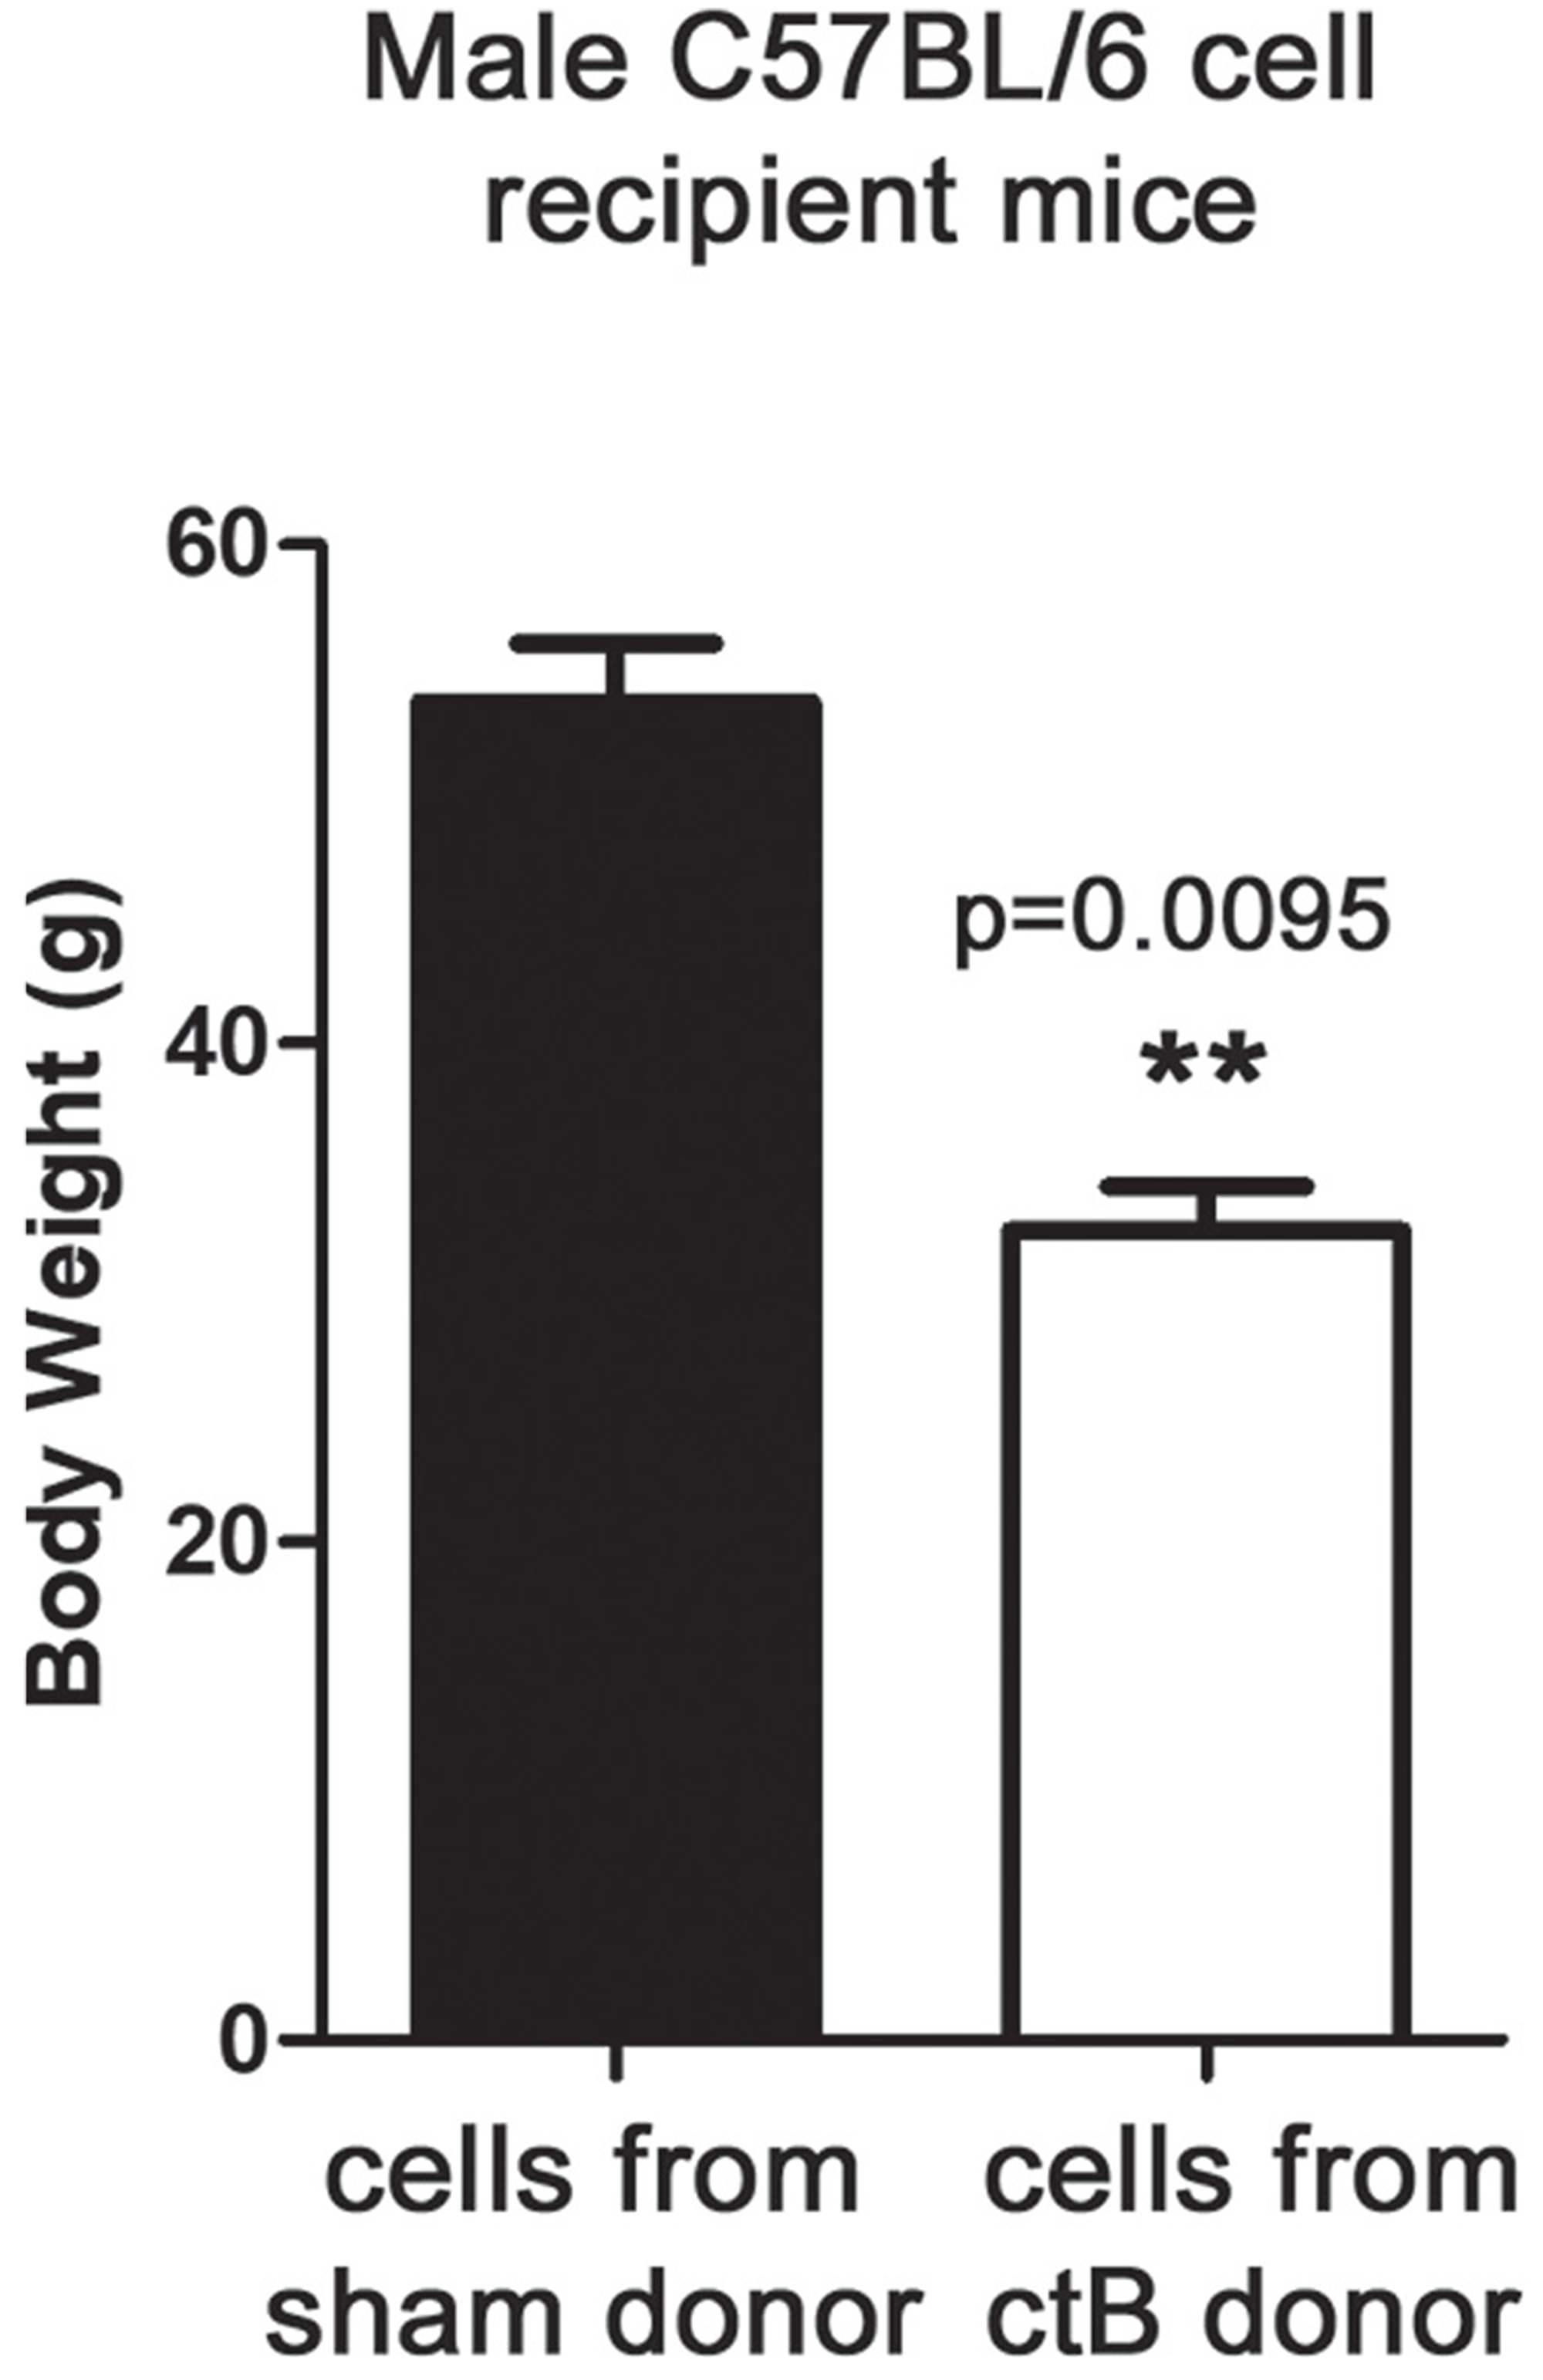 ctB control of age-associated increase of body weight is mediated by immune cells.